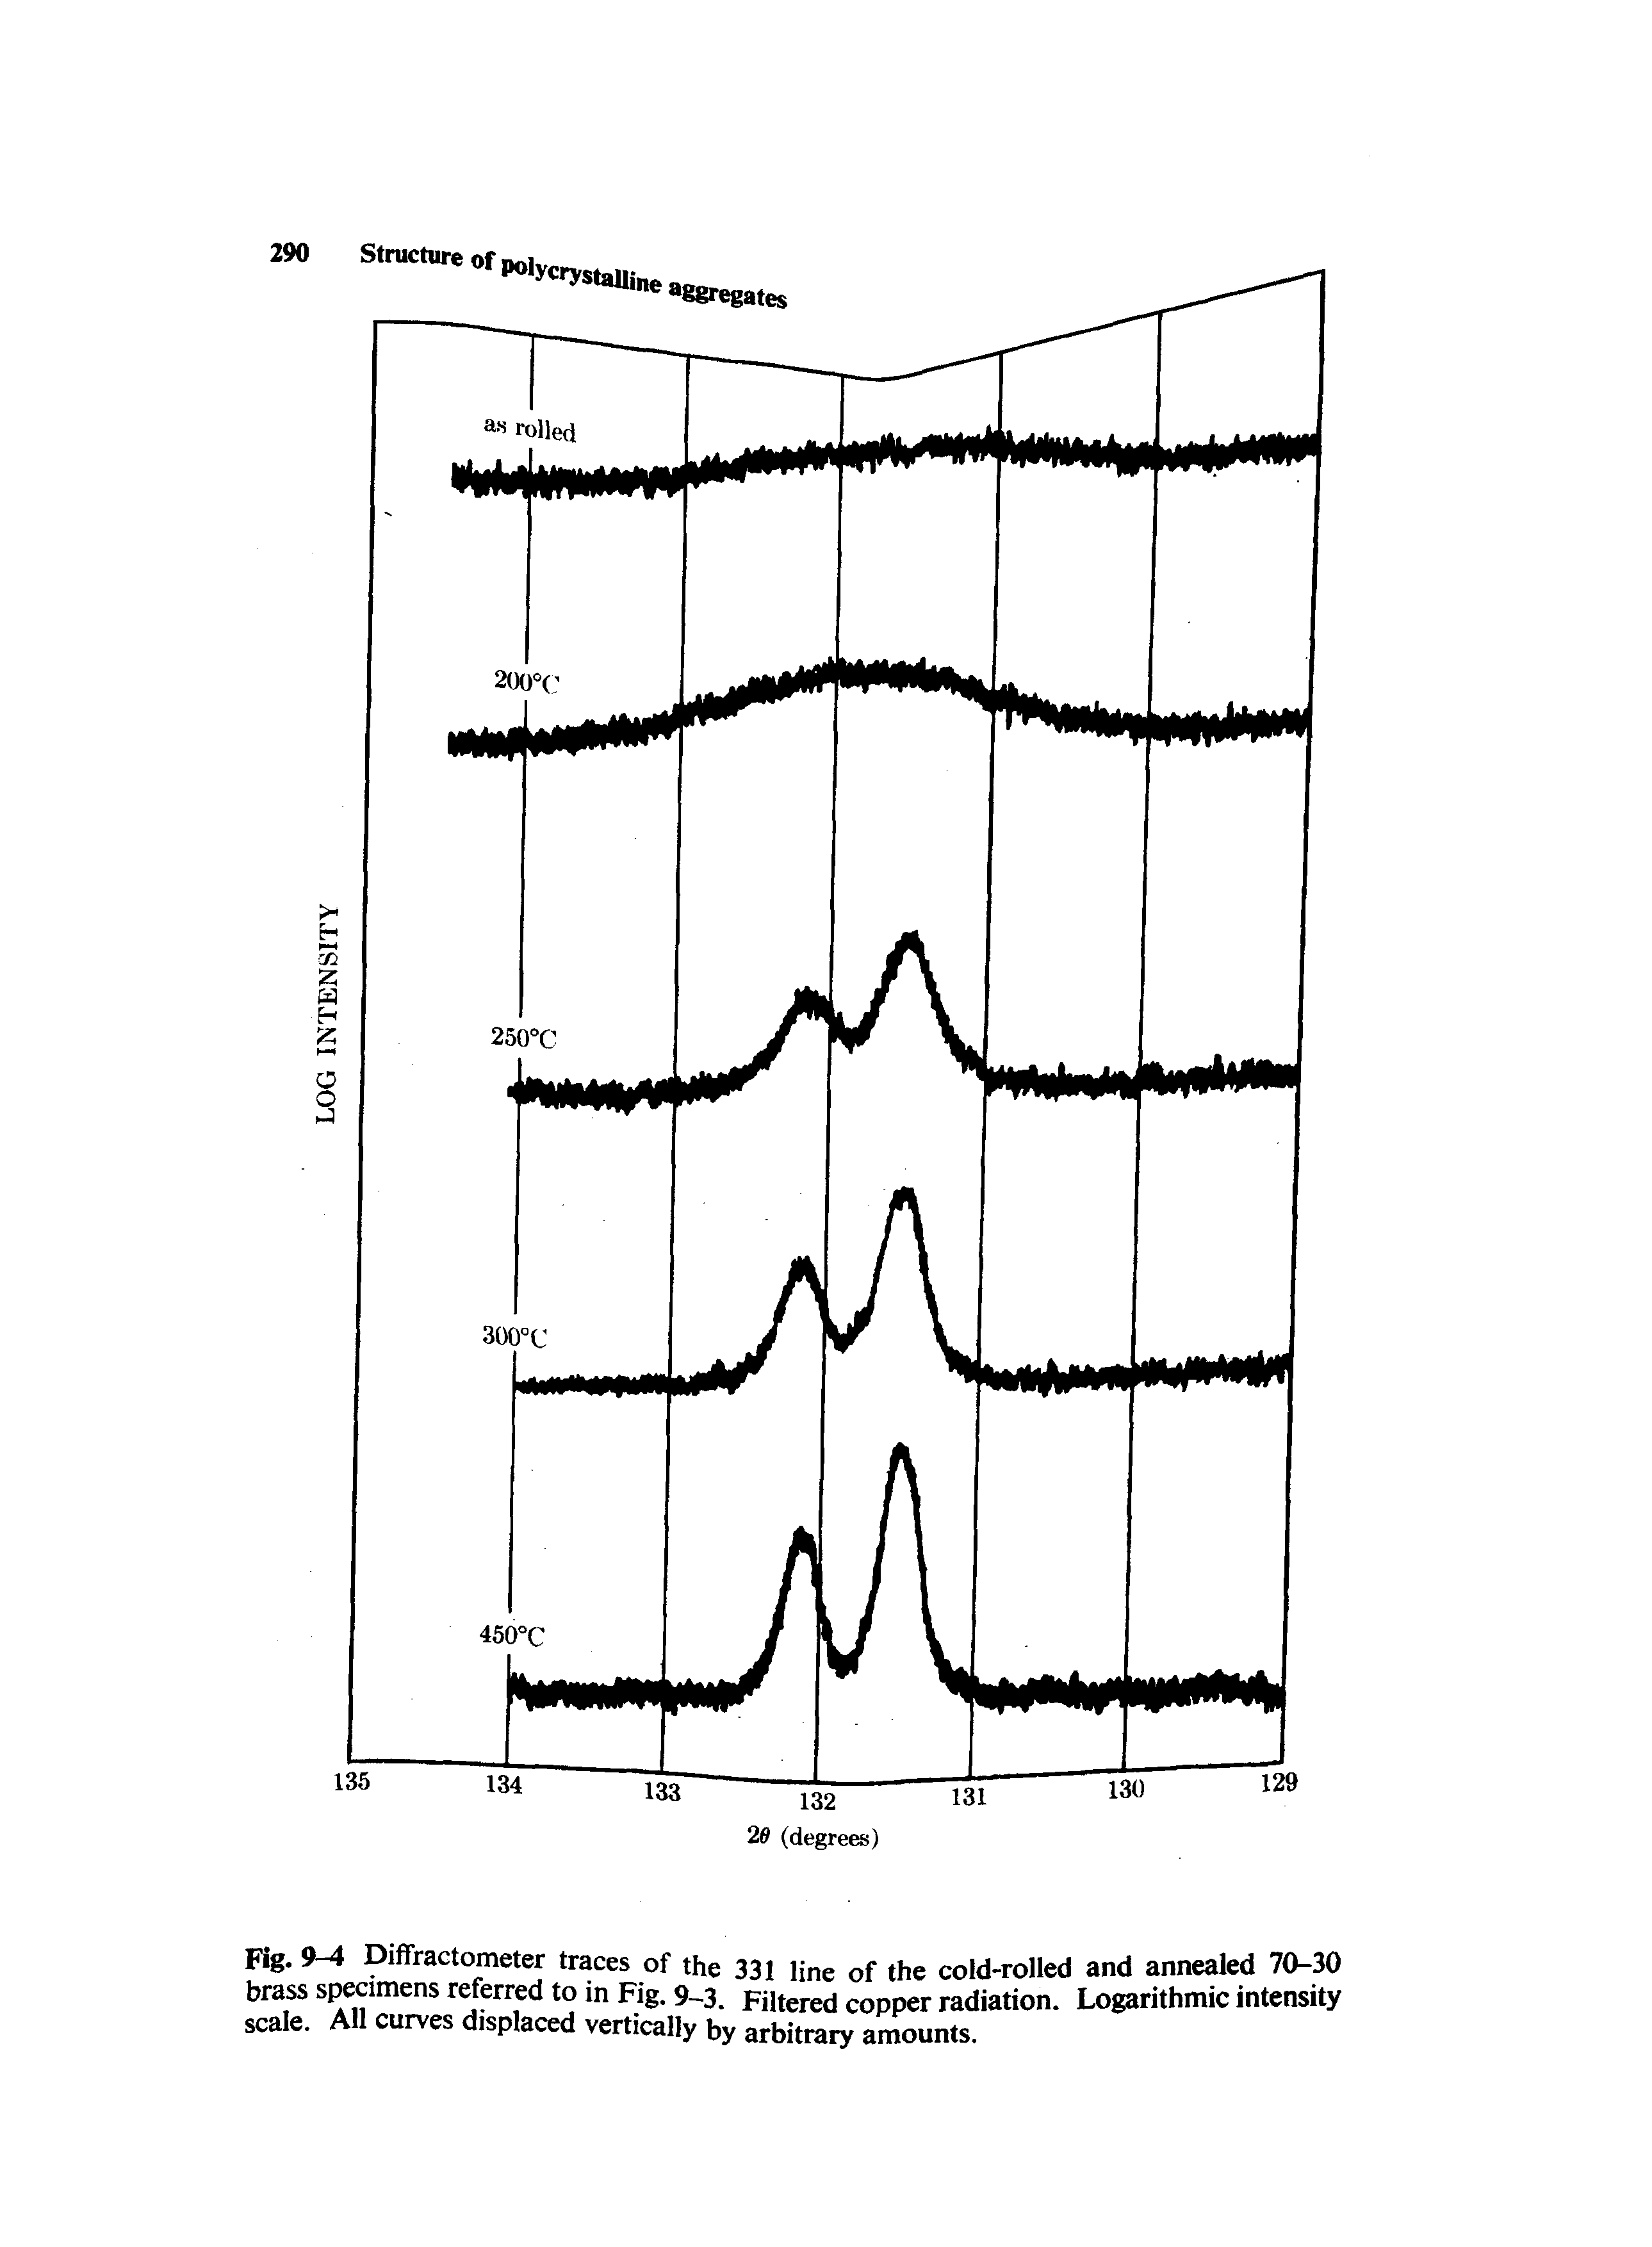 Fig. 9-4 Diffractometer traces of the 331 line of the cold-rolled and annealed 70-30 brass specimens referred to in Fig. 9-3. Filtered copper radiation. Logarithmic intensity scale. All curves displaced vertically by arbitrary amounts.